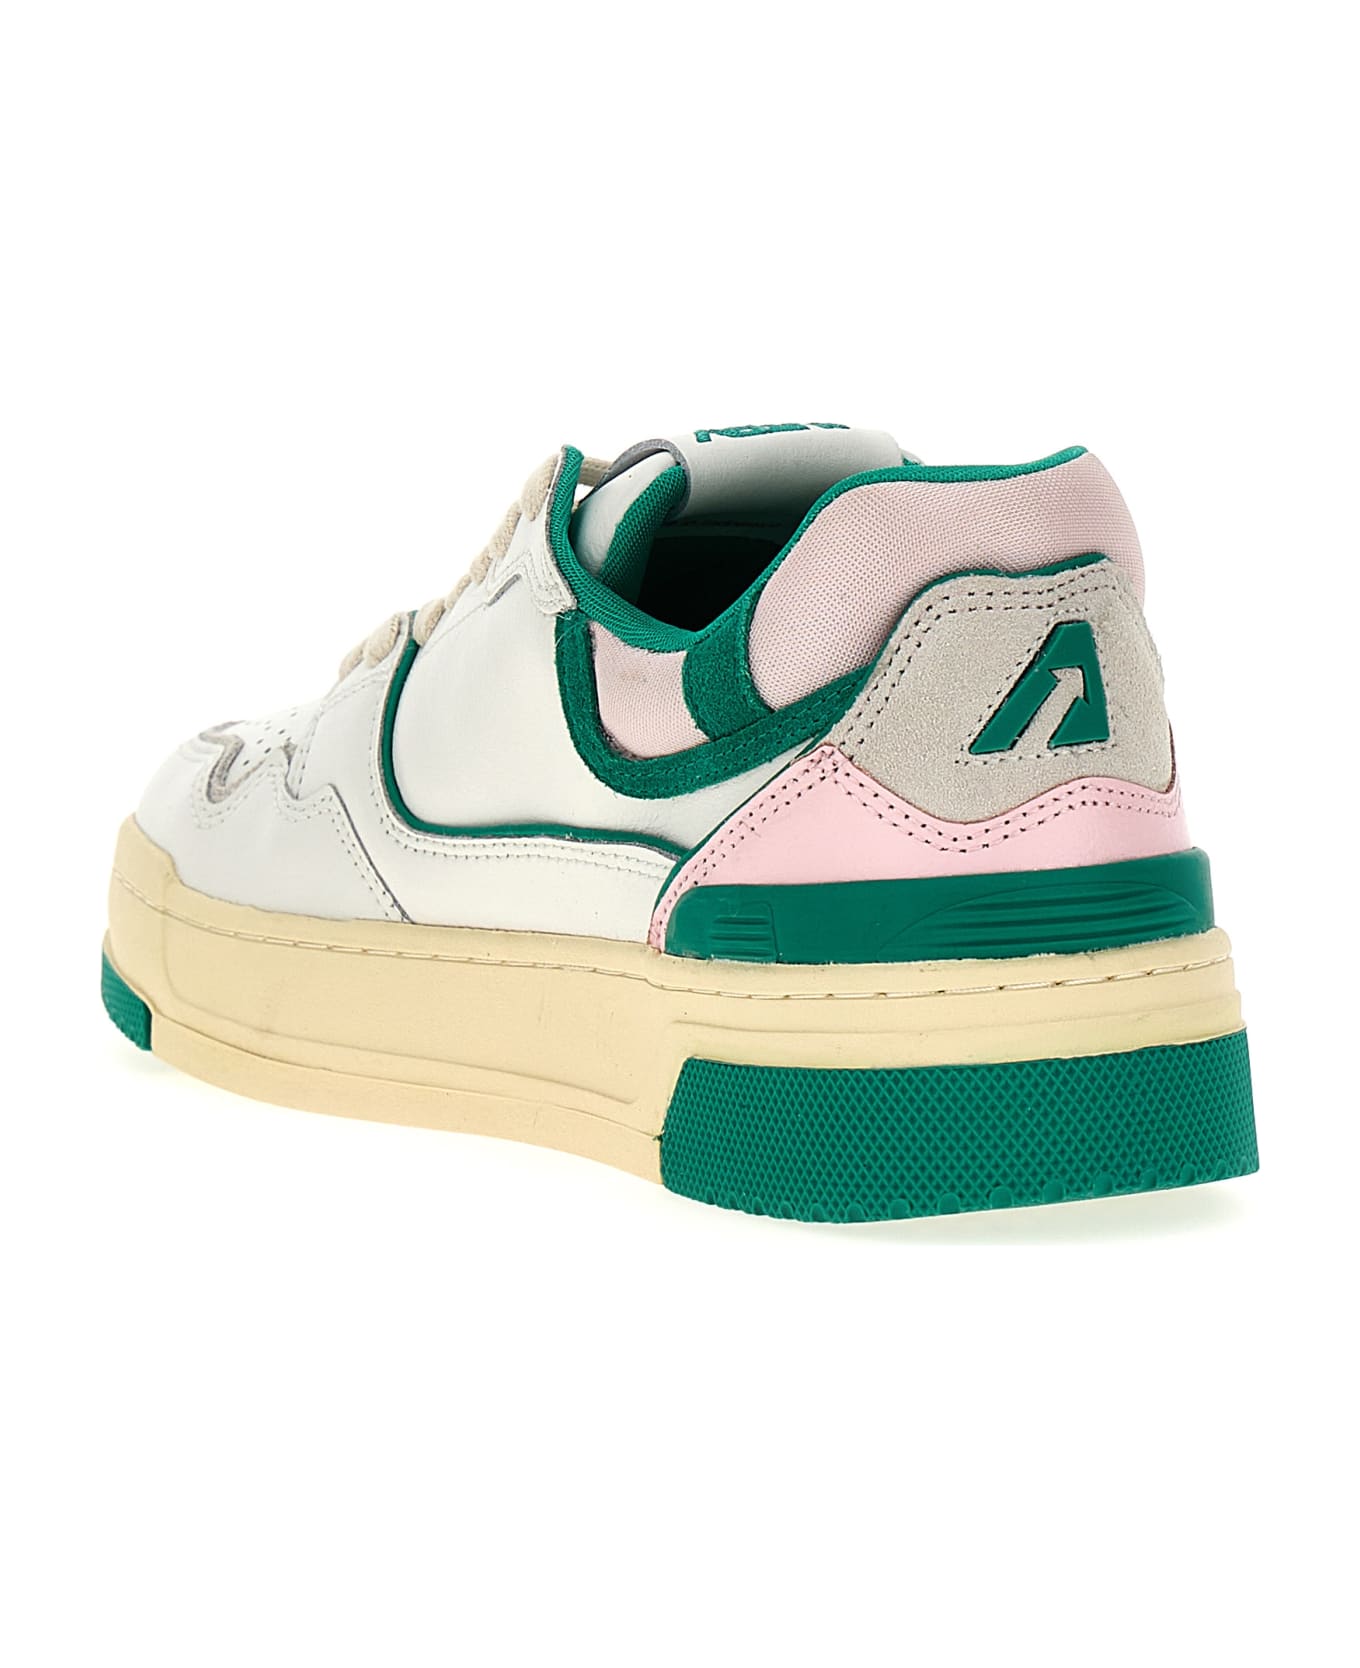 Autry Clc Leather Sneakers - Green